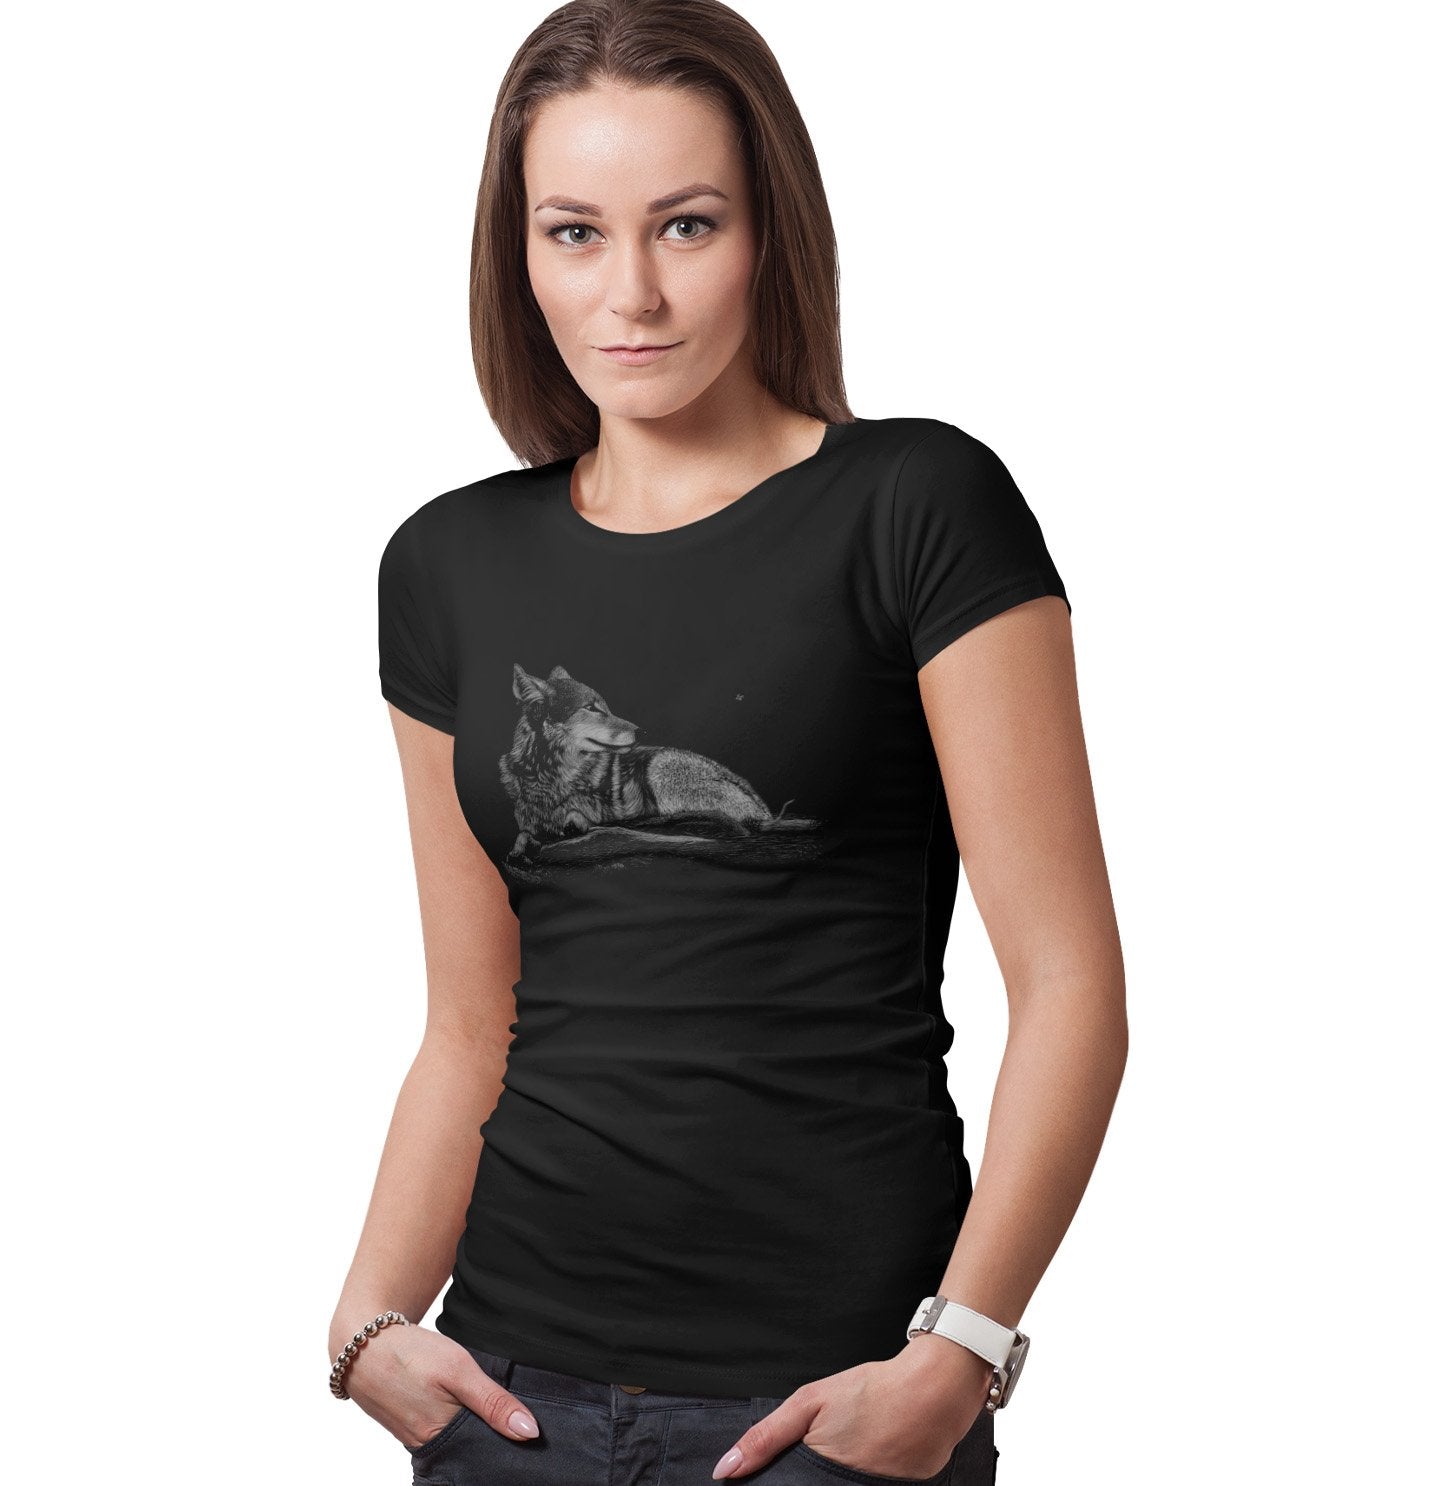 Coyote on Black - Women's Fitted T-Shirt - Animal Tee